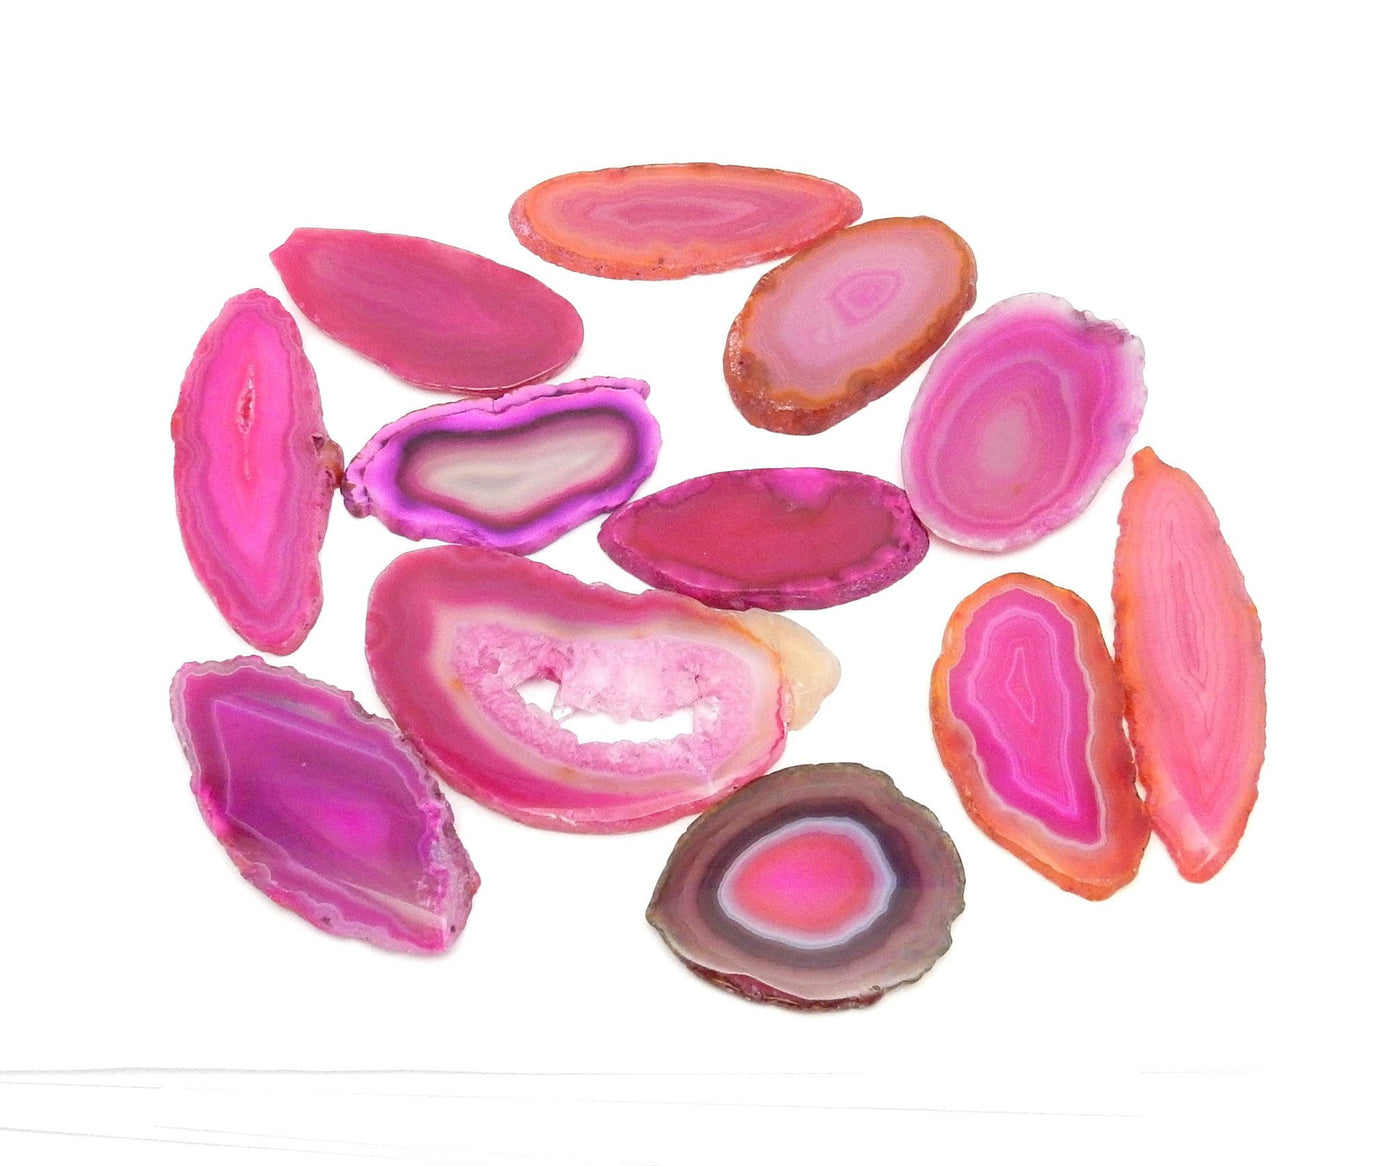 Pink agate slices being displayed on a white back ground.